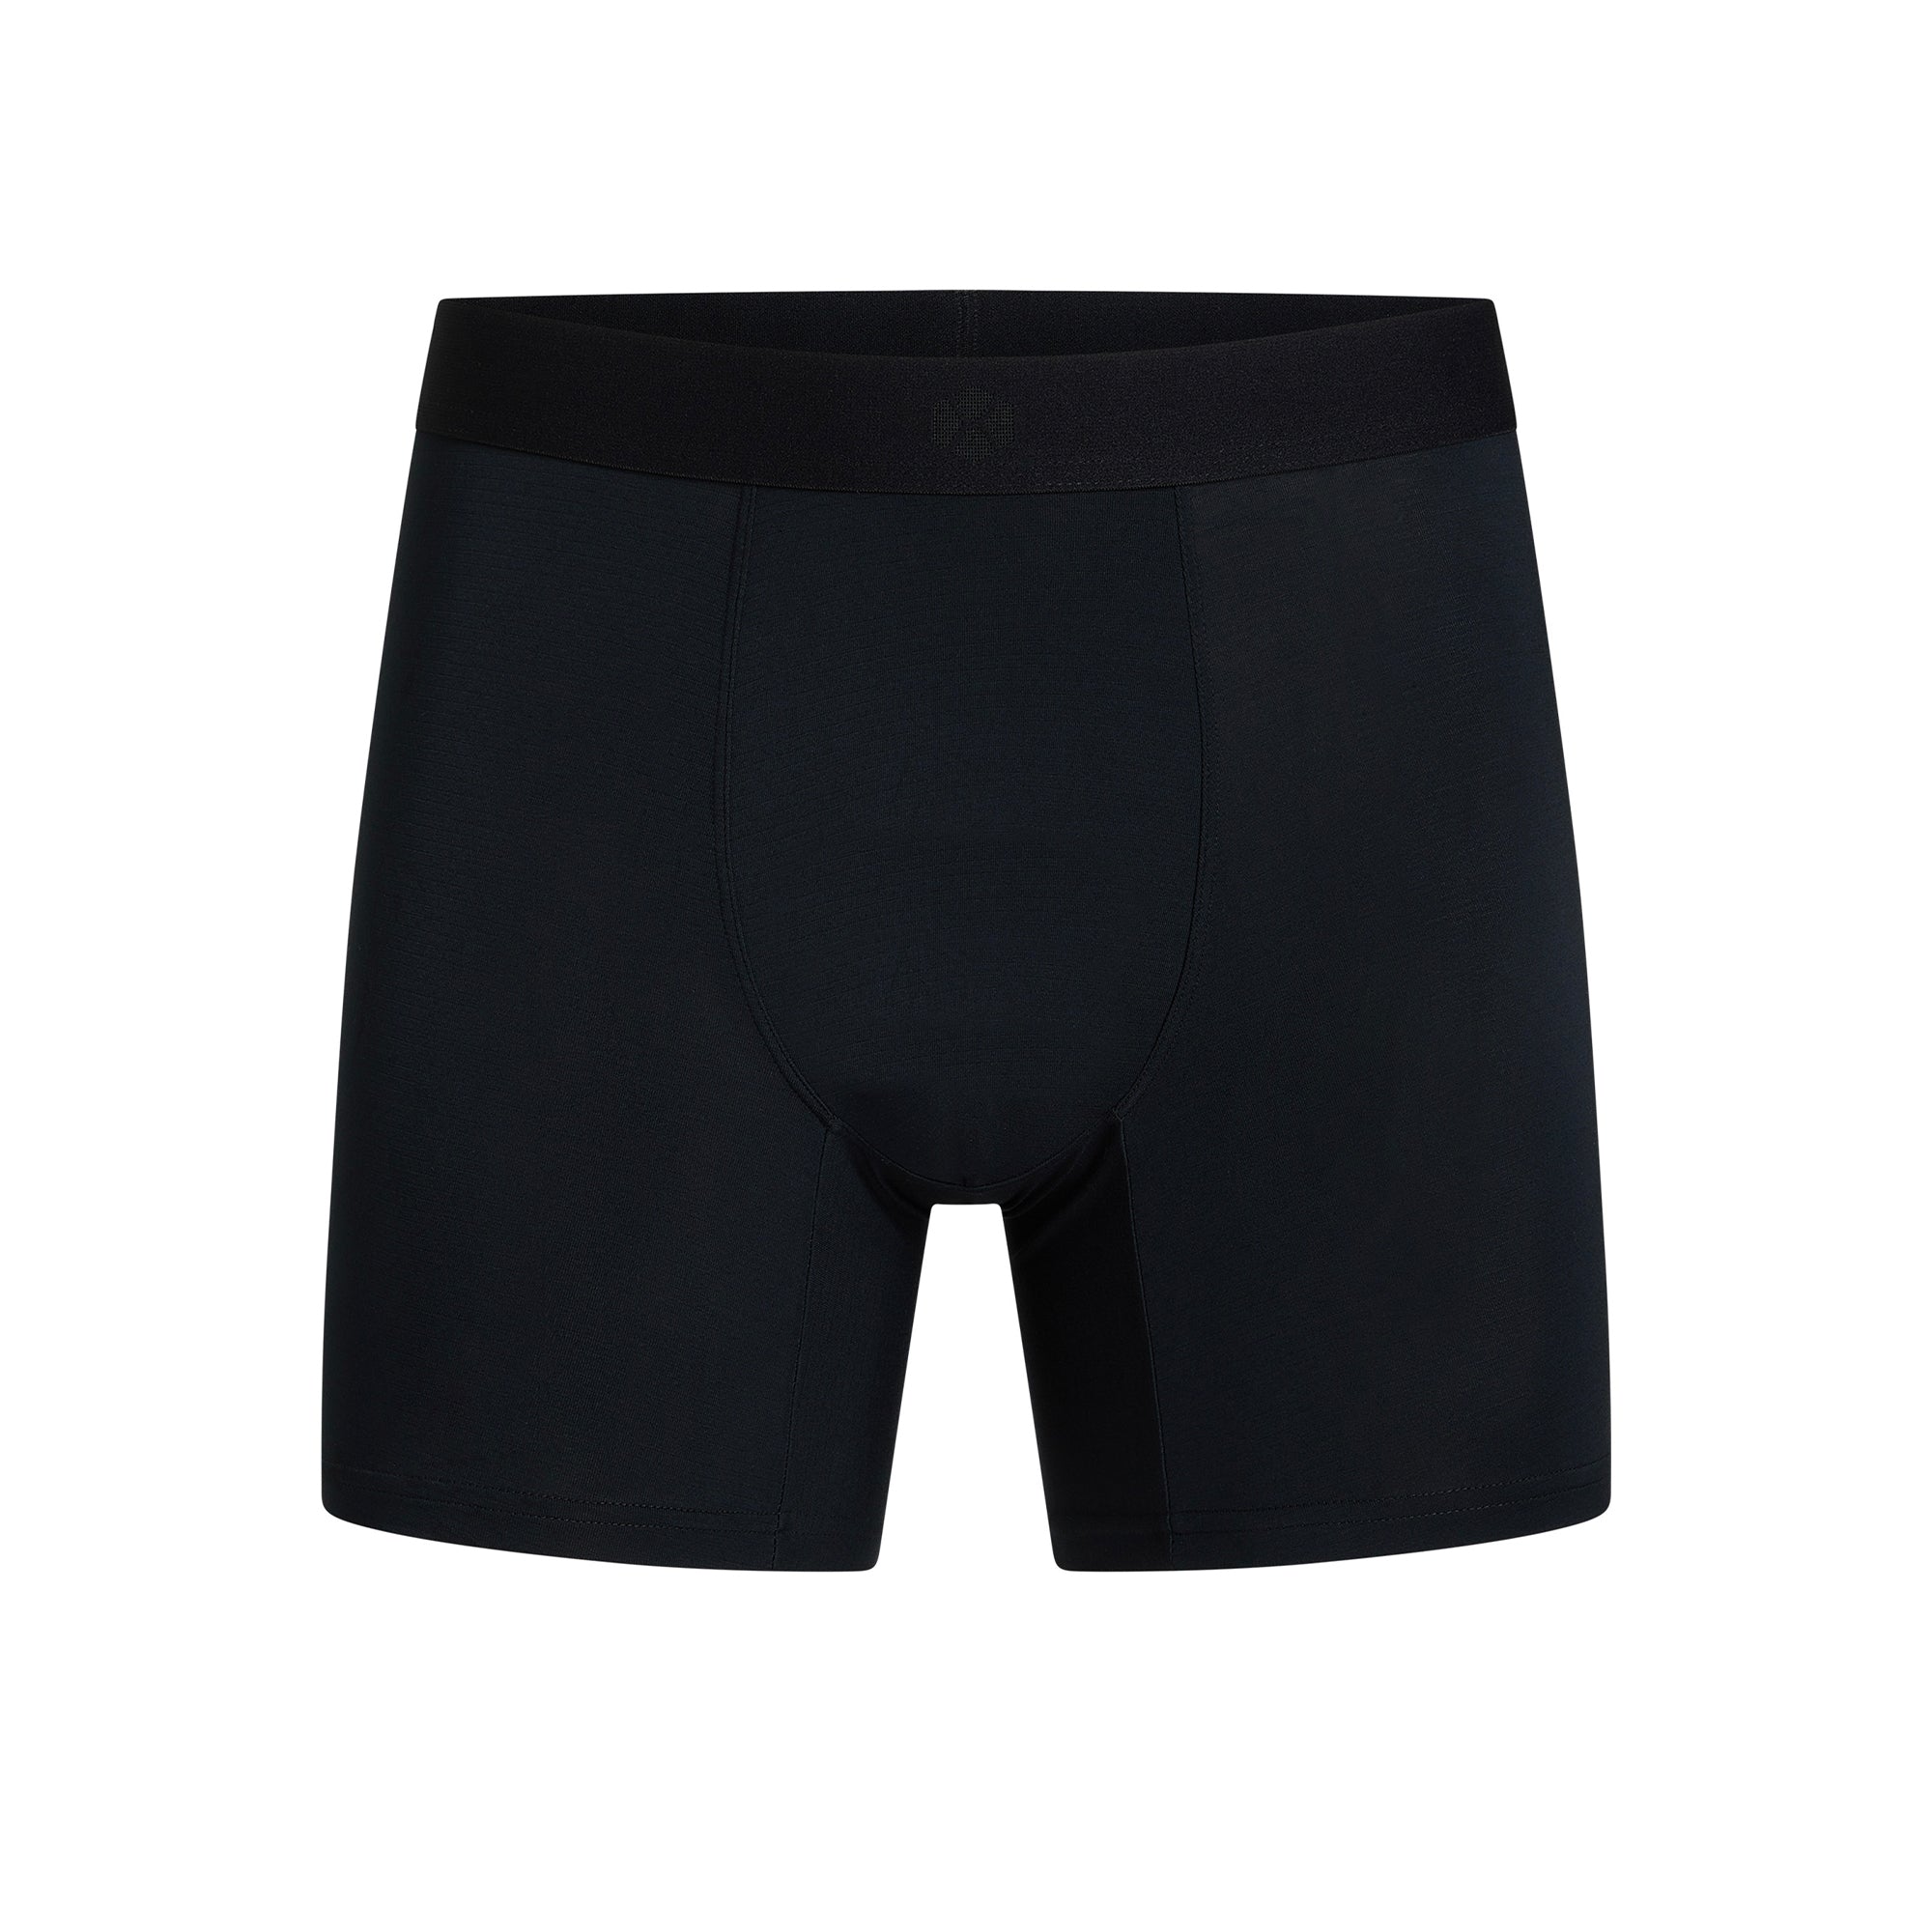 The Benefits of Graphene in Men's Underwear: Our Open Fly Boxer